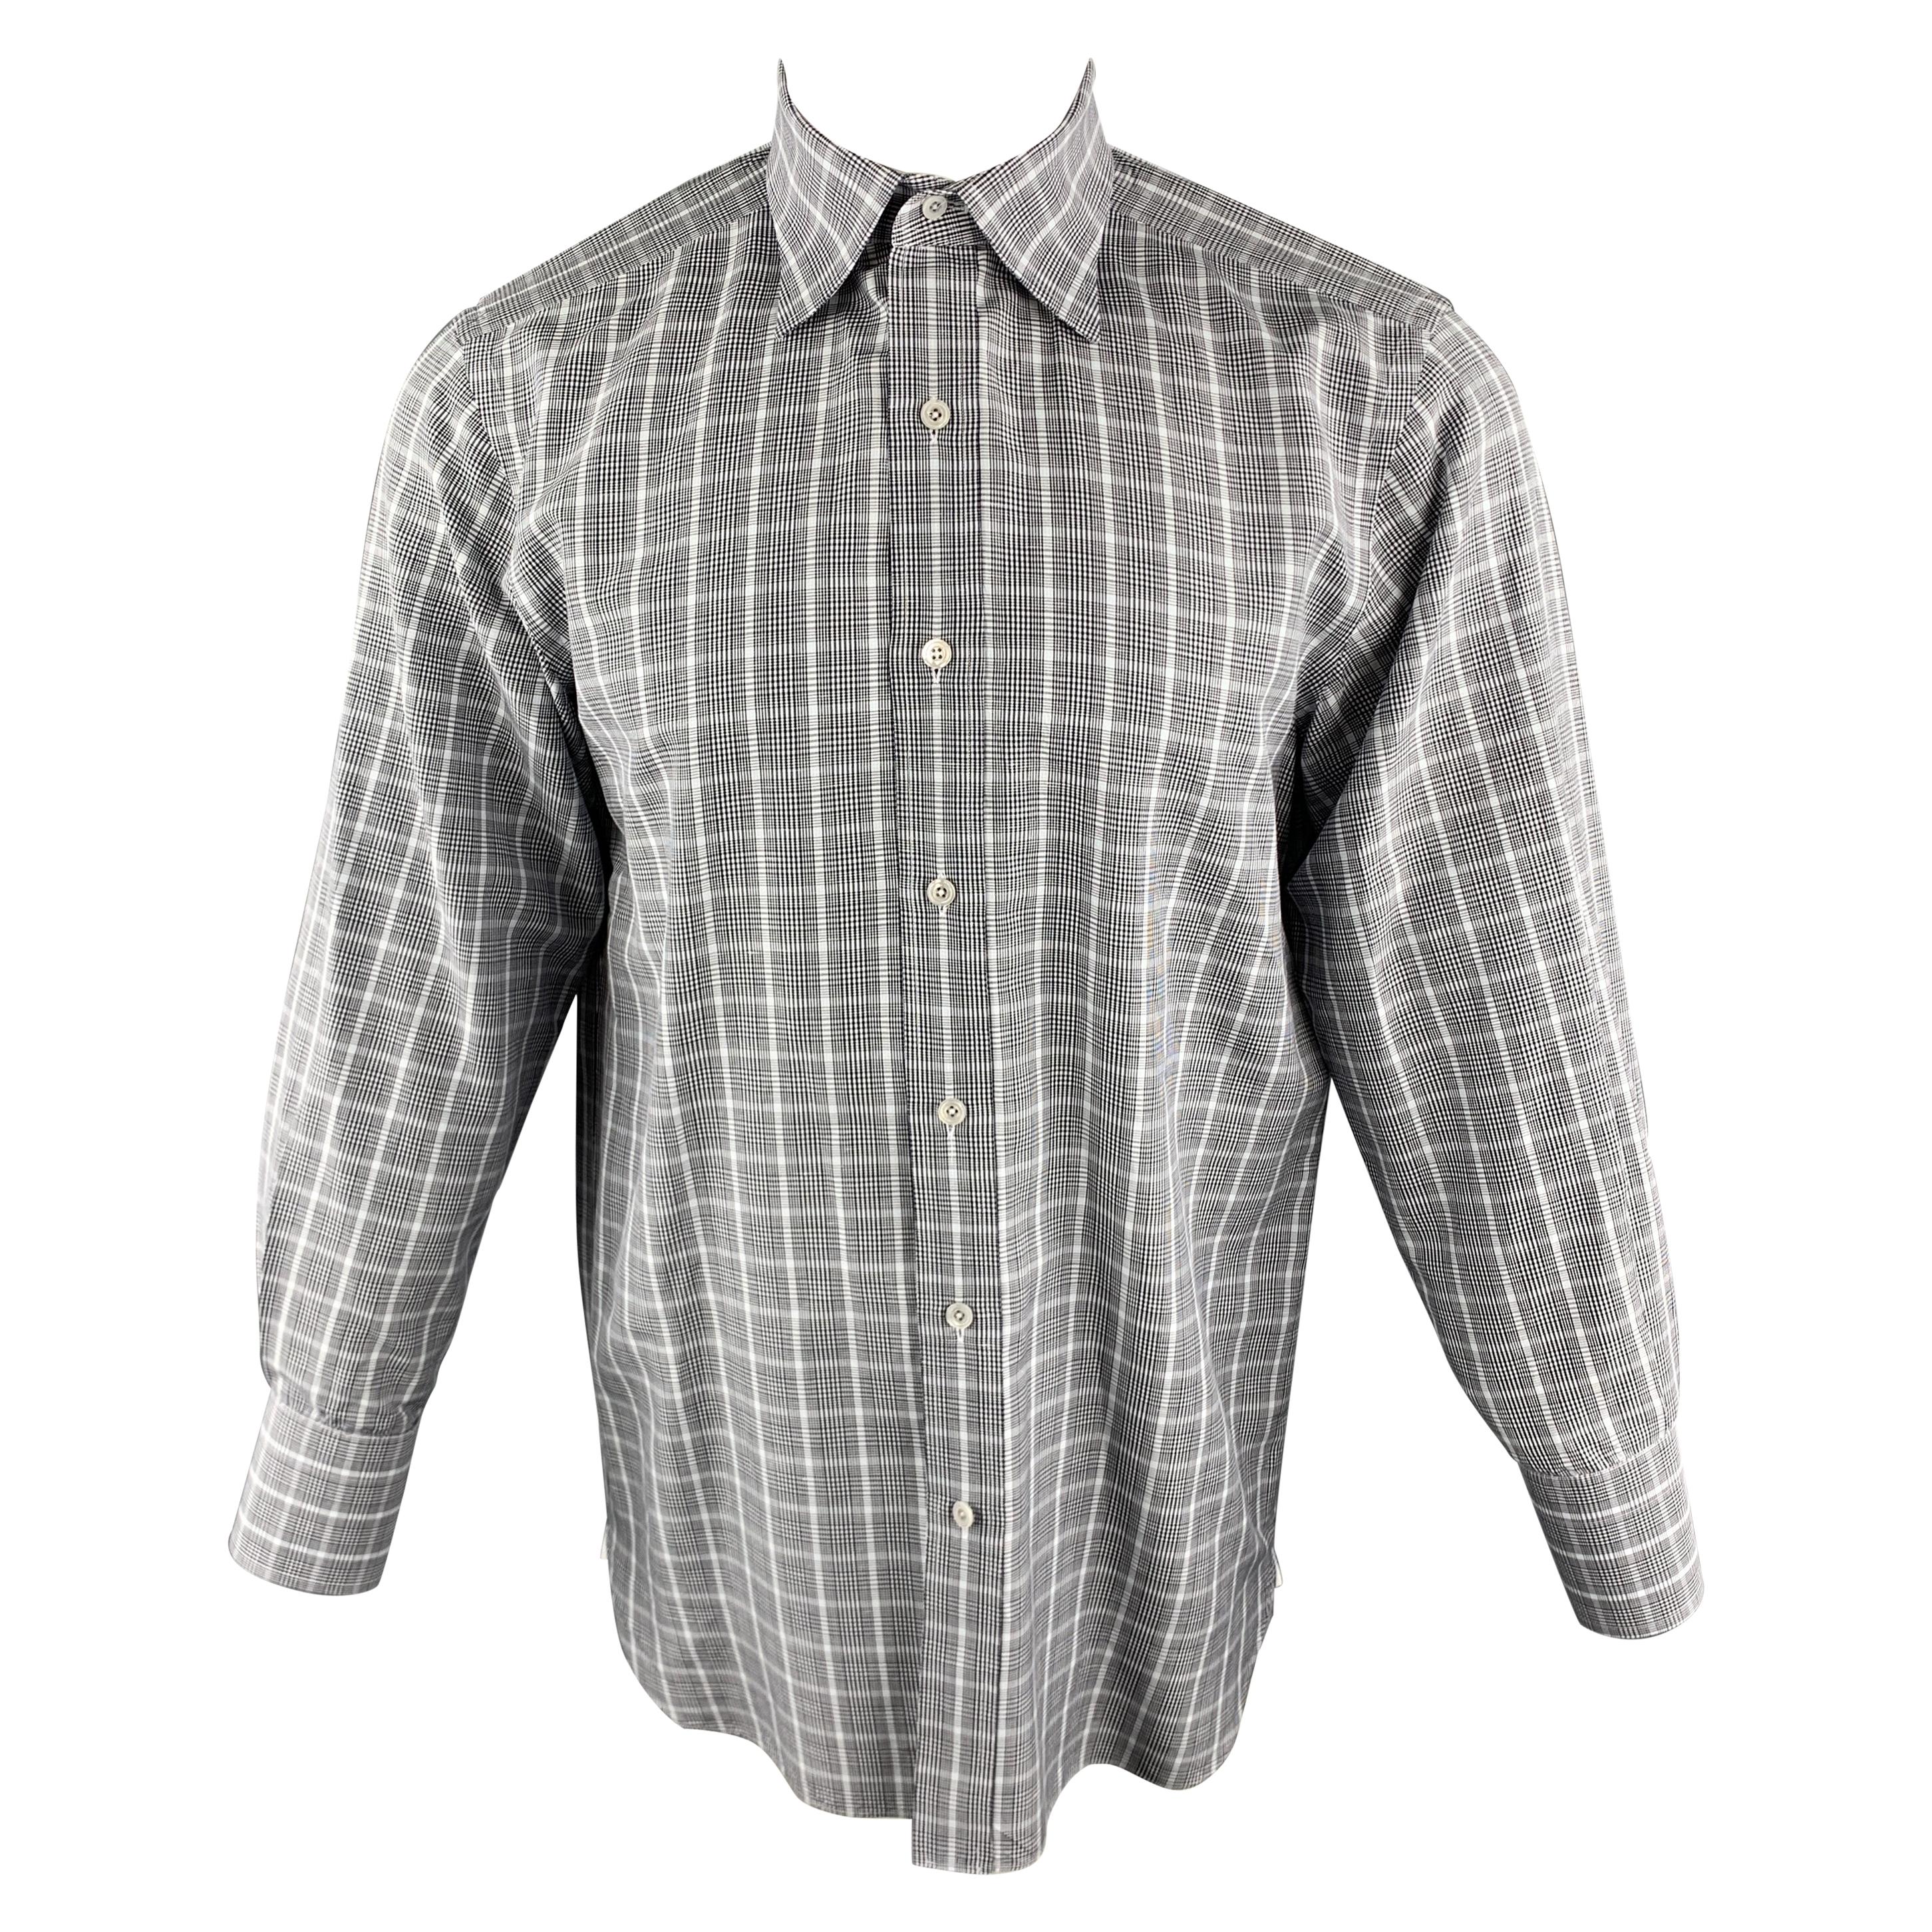 TOM FORD Size M Blue & Grey Plaid Cotton Pointed Collar Button Up Shirt